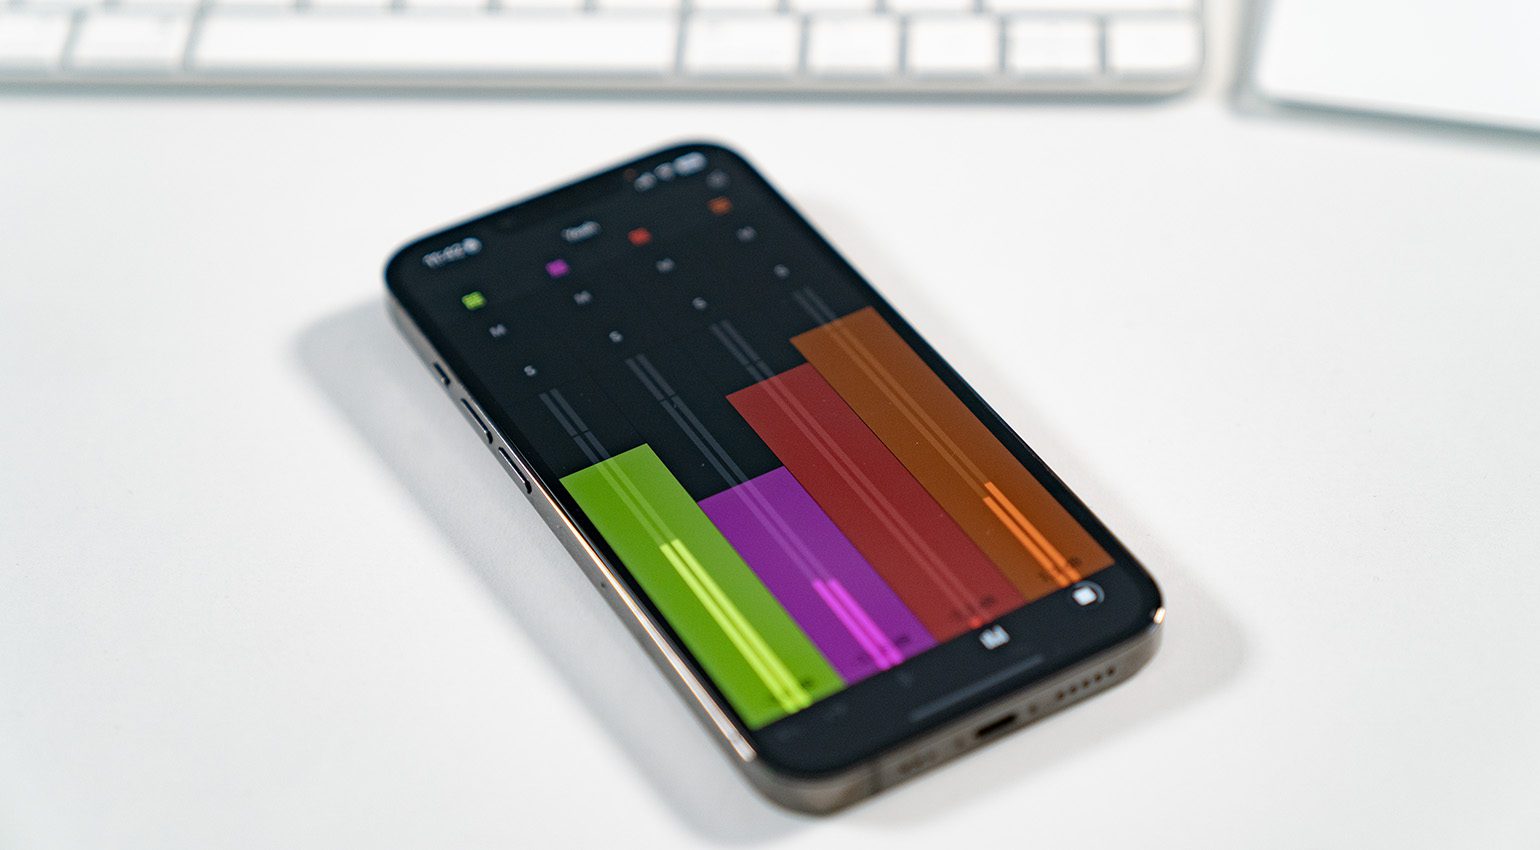 First Look: Ableton Note is a sketchbook for Live as an iOS App - gearnews.com